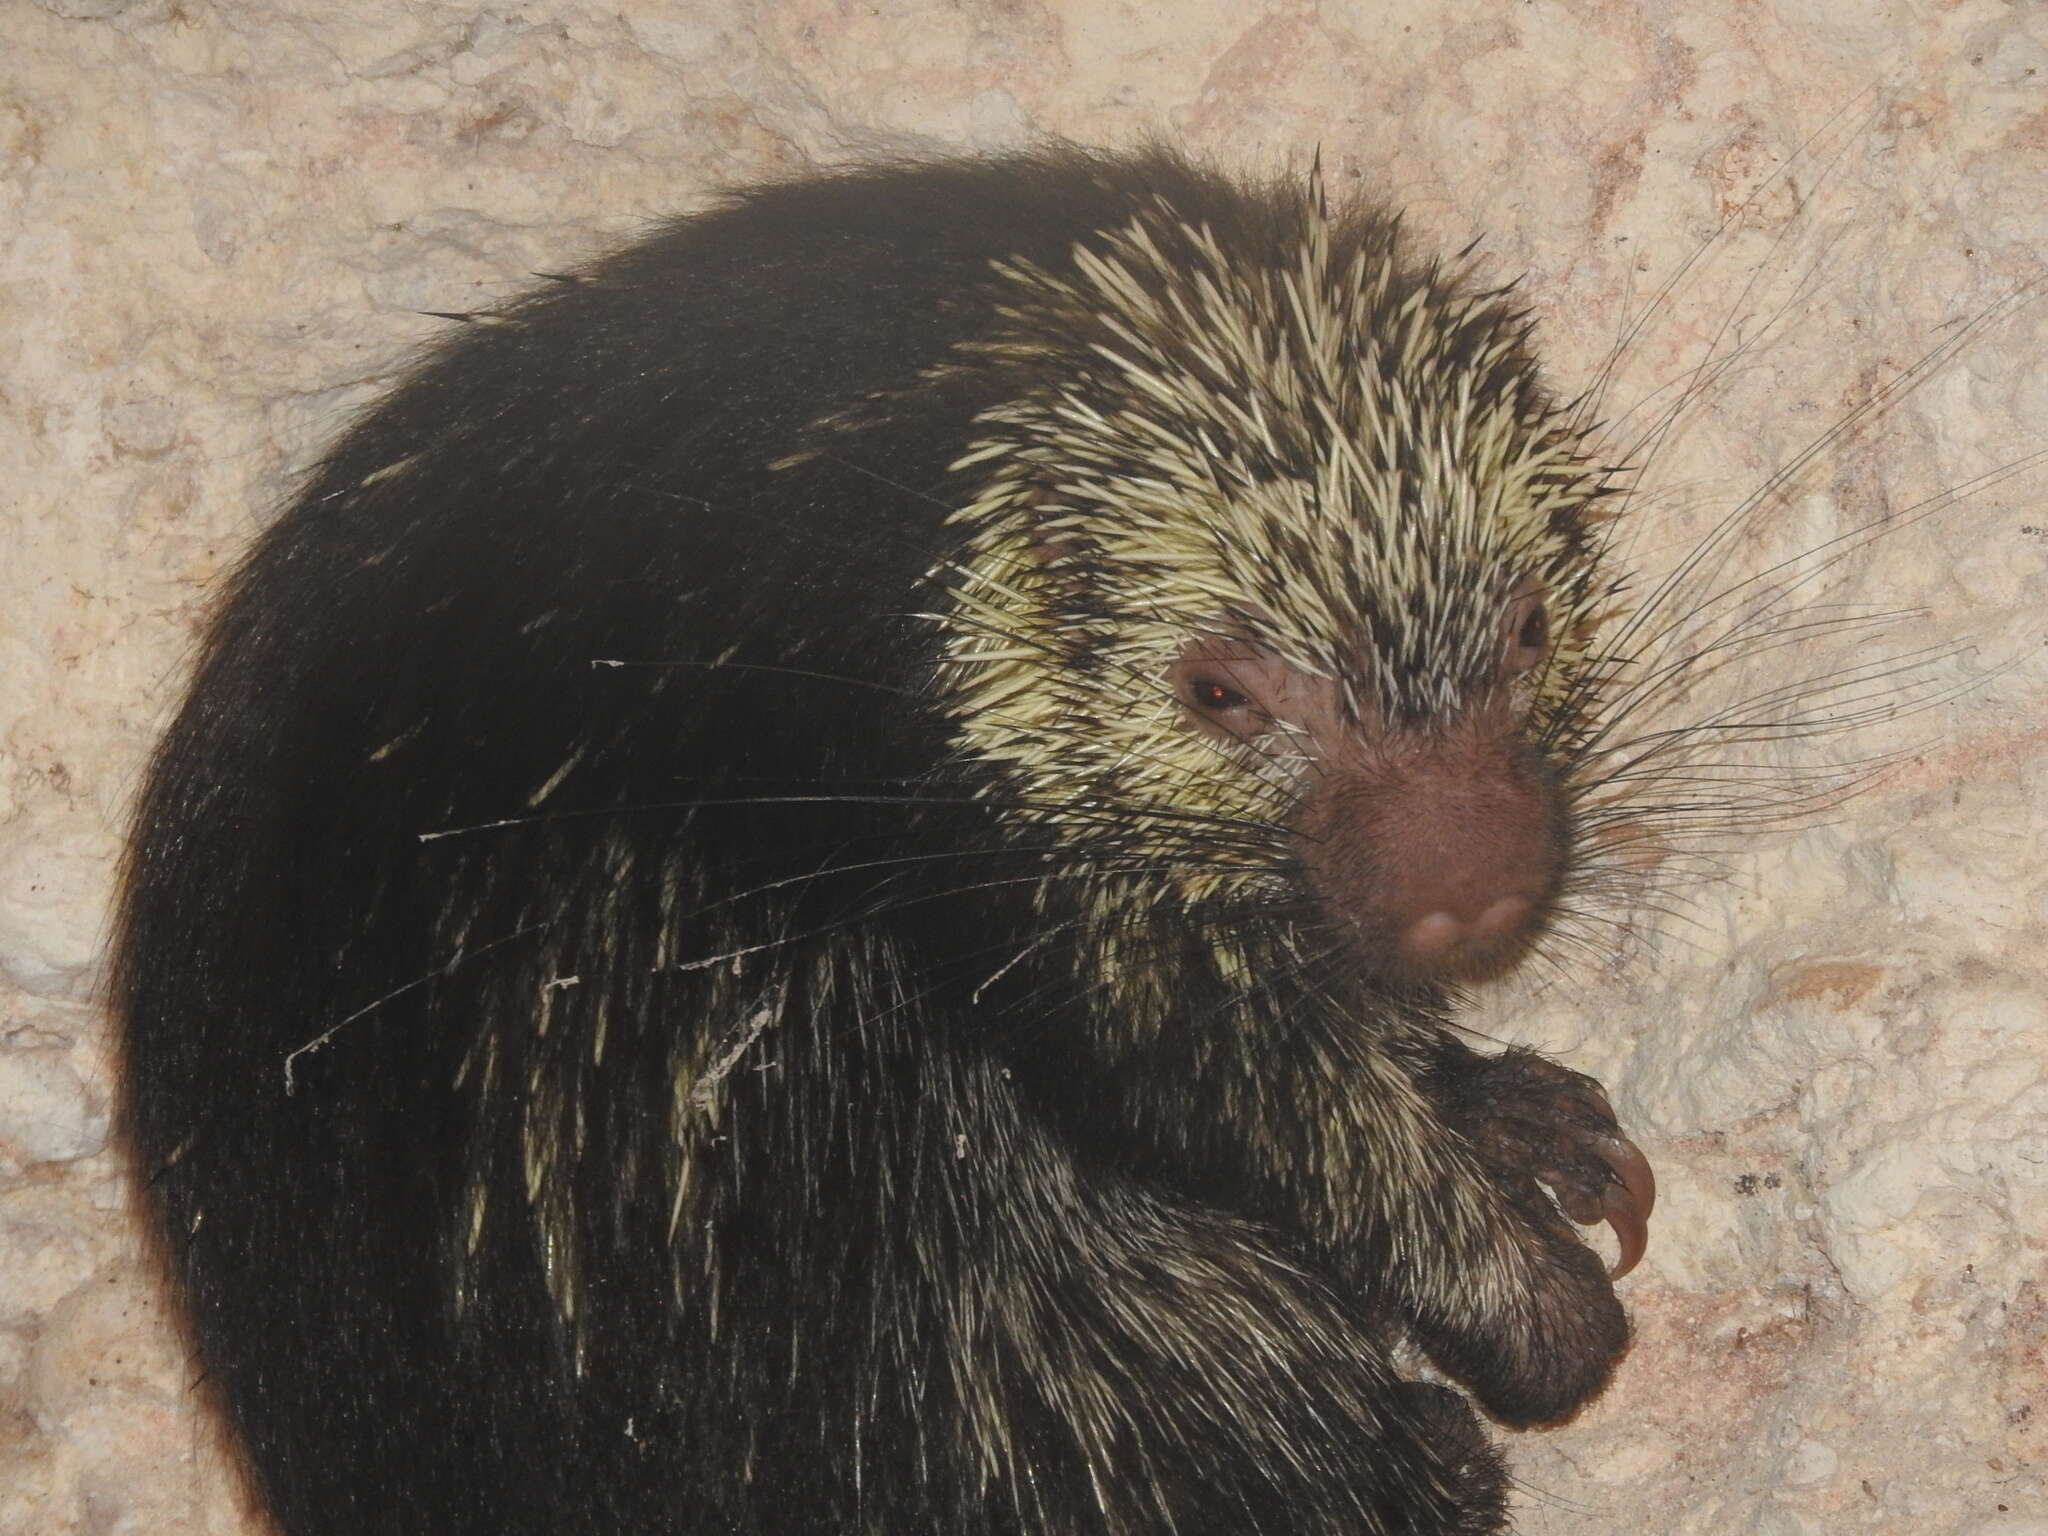 Image of Hairy Dwarf Porcupines